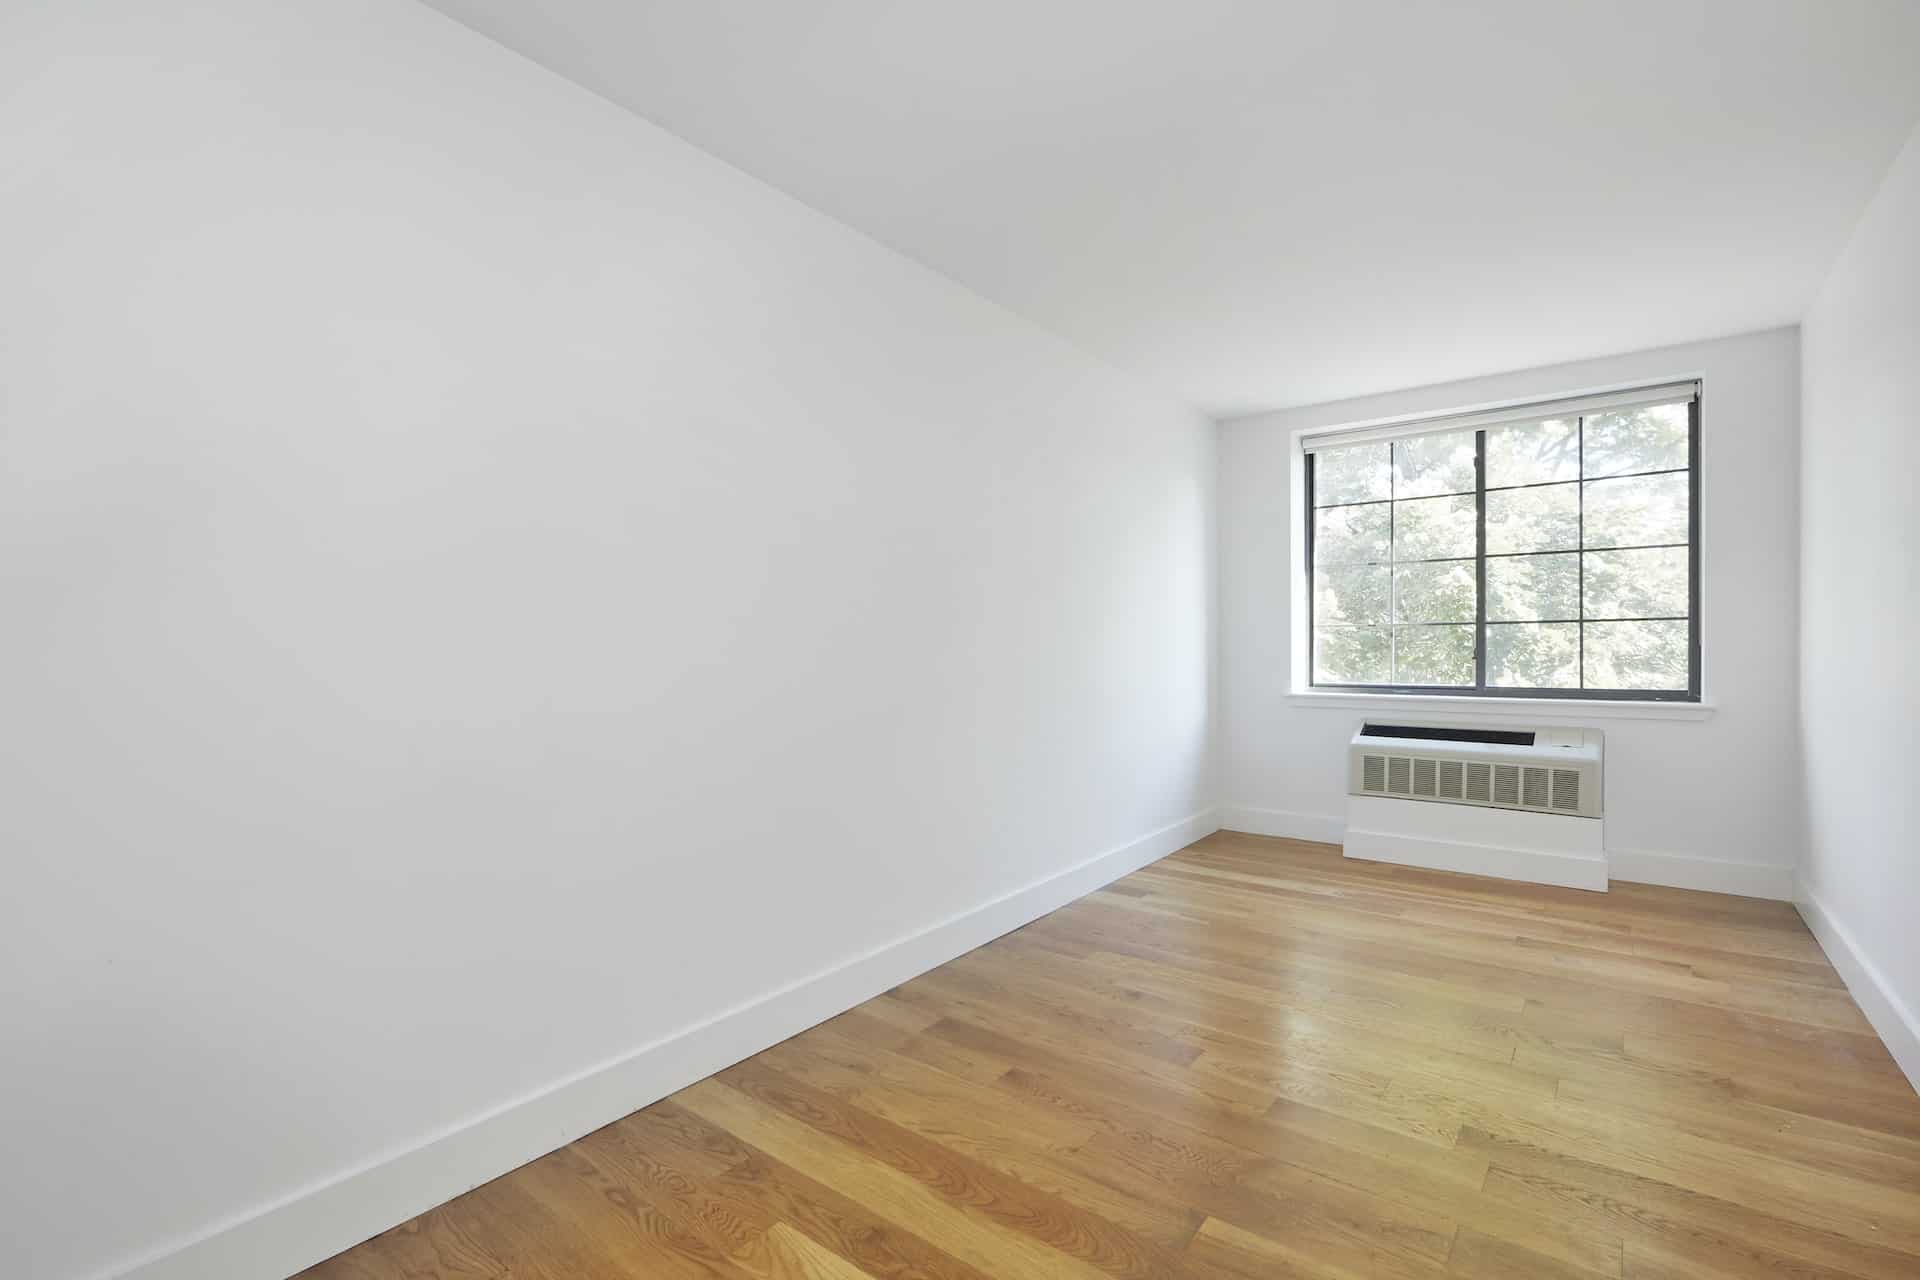 Bedroom at 83 Bushwick Place apartments in Brooklyn with an a/c unit, hardwood floors, and a large window.